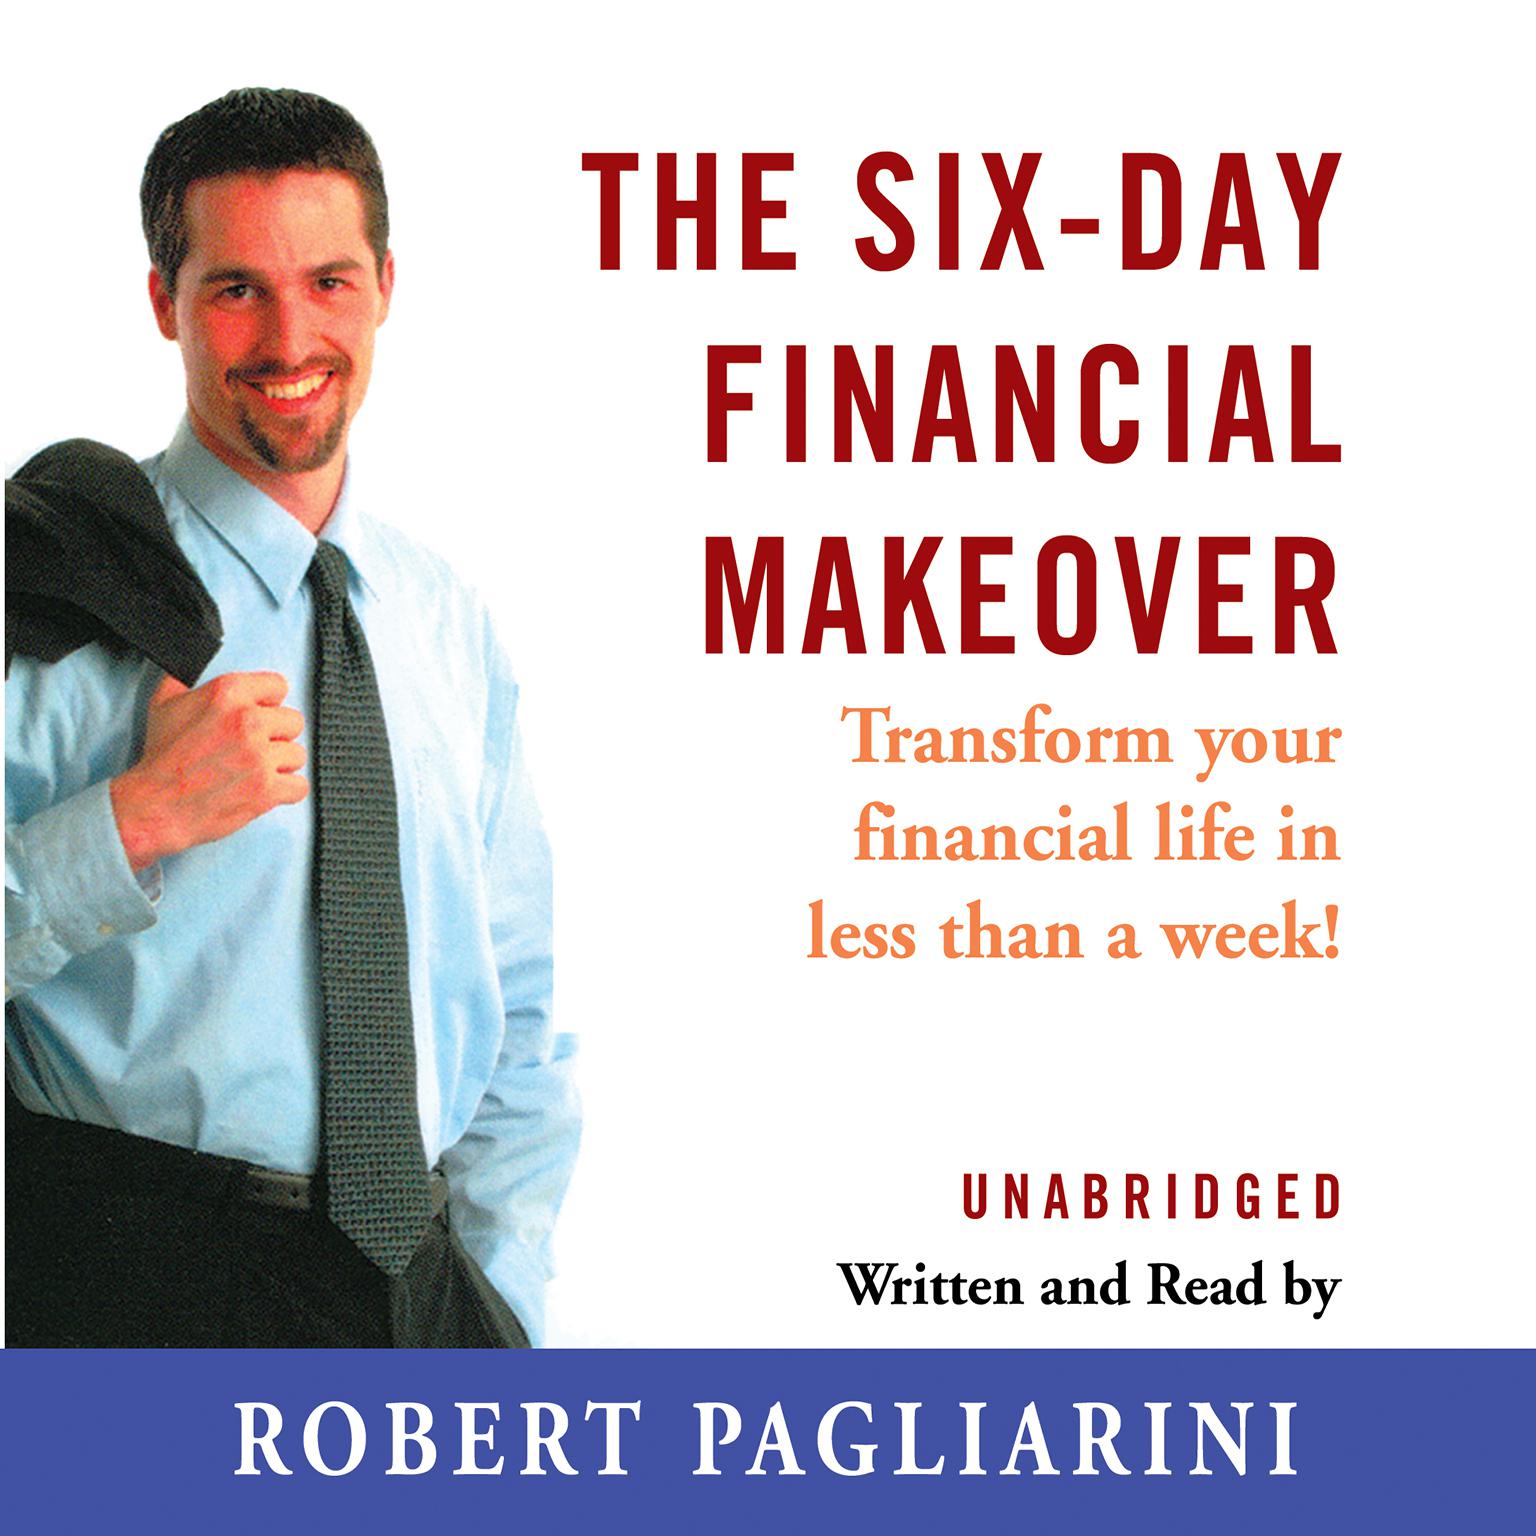 The Six-Day Financial Makeover: Transform Your Financial Life in Less Than a Week Audiobook, by Robert Pagliarini